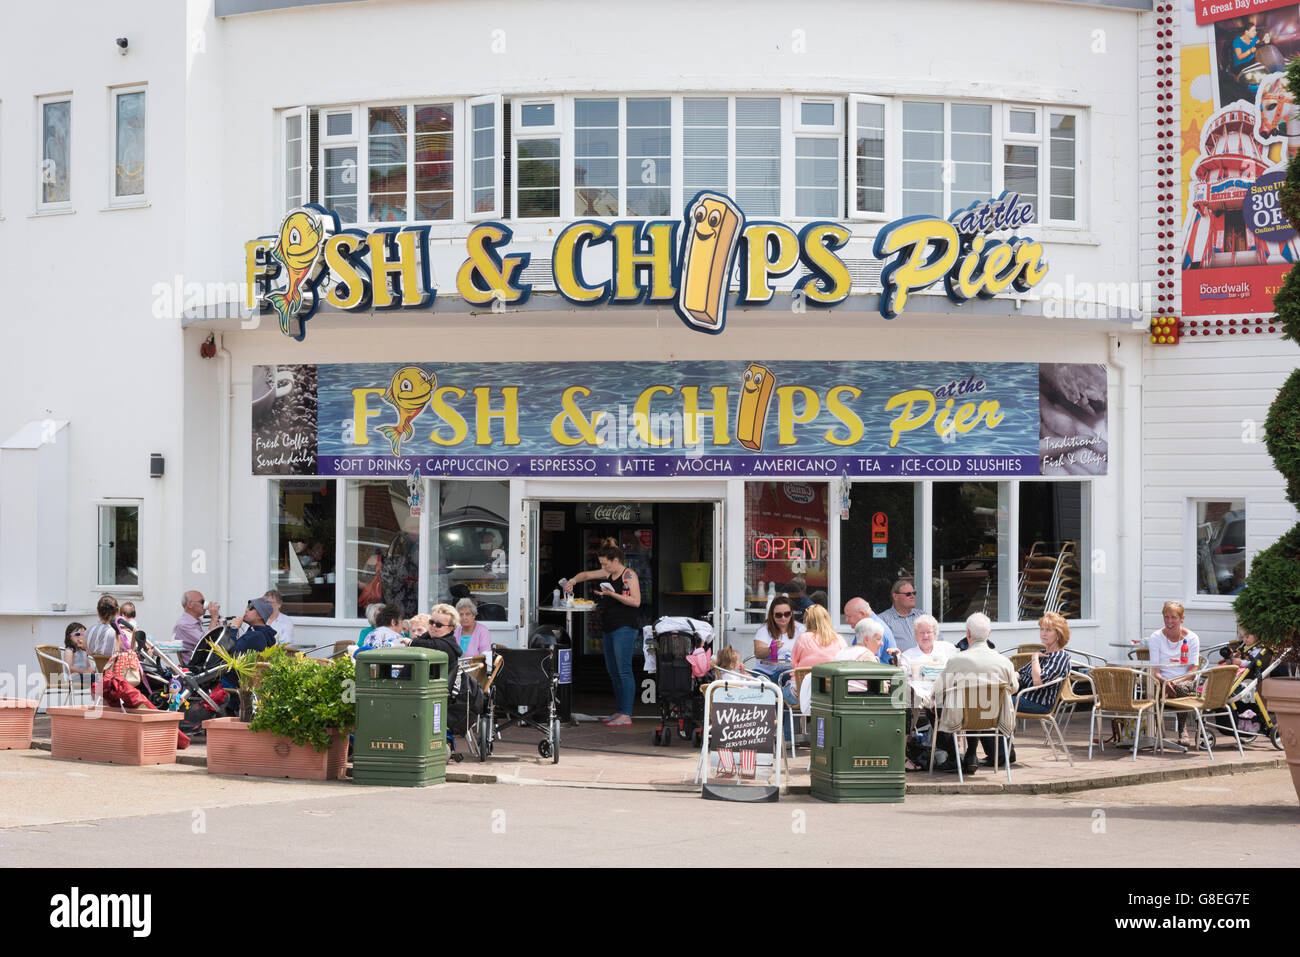 A fish and chip shop at Clacton Pier UK with people eating outside at tables Stock Photo